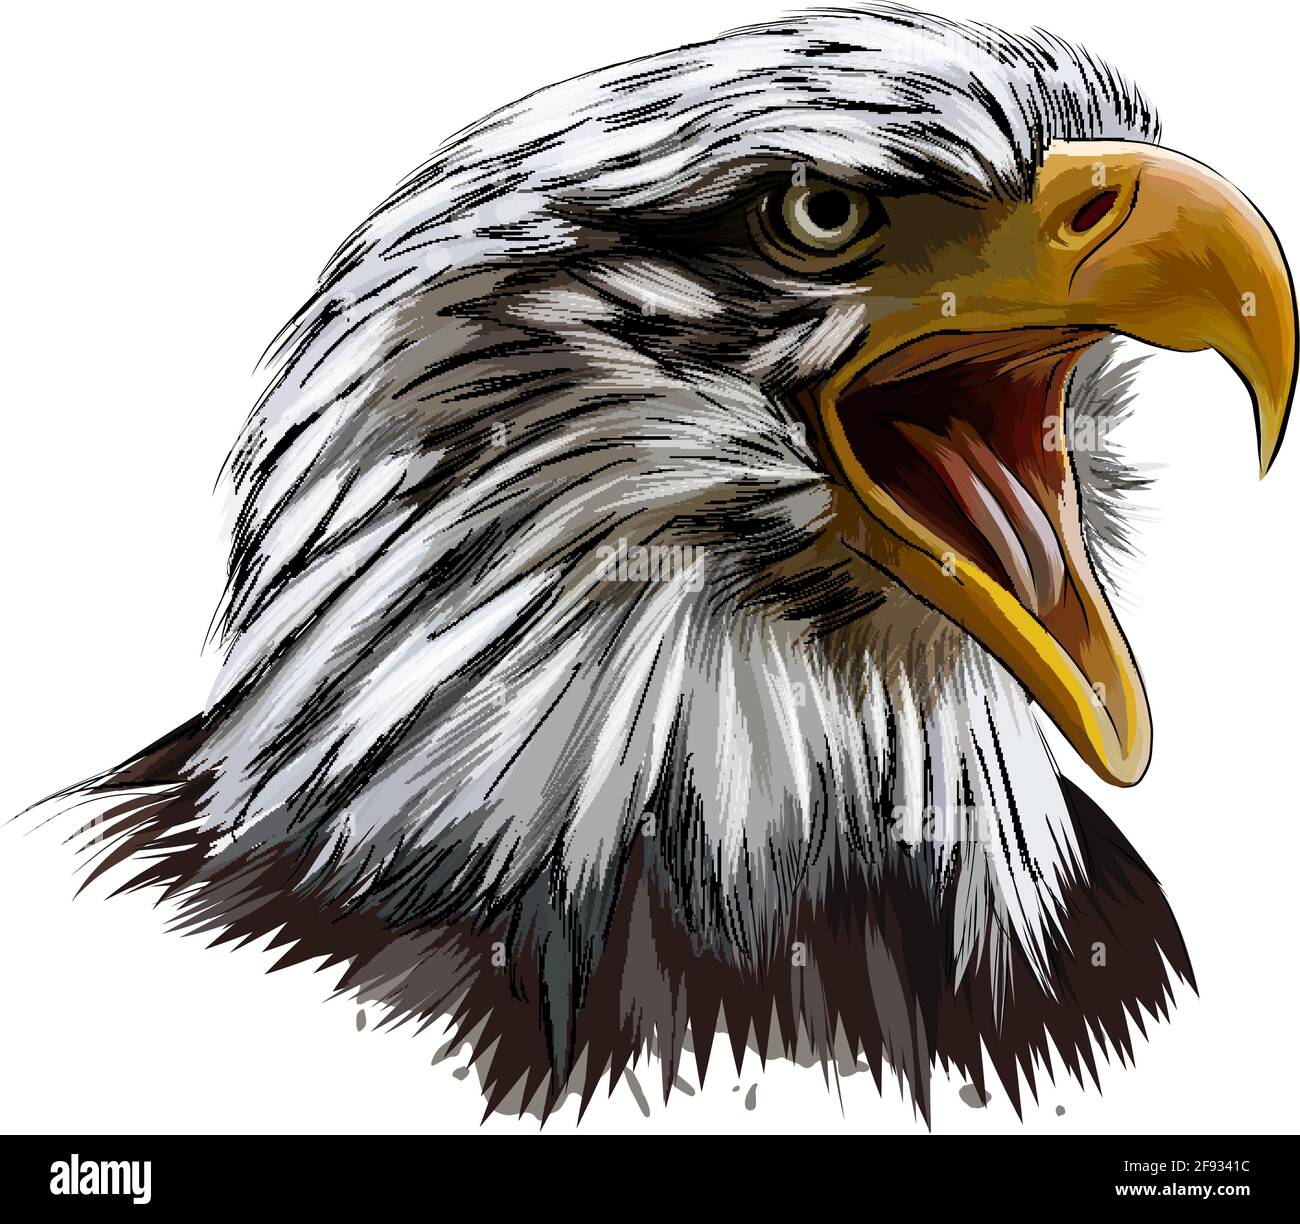 https://c8.alamy.com/comp/2F9341C/bald-eagle-head-portrait-from-a-splash-of-watercolor-colored-drawing-realistic-vector-illustration-of-paints-2F9341C.jpg